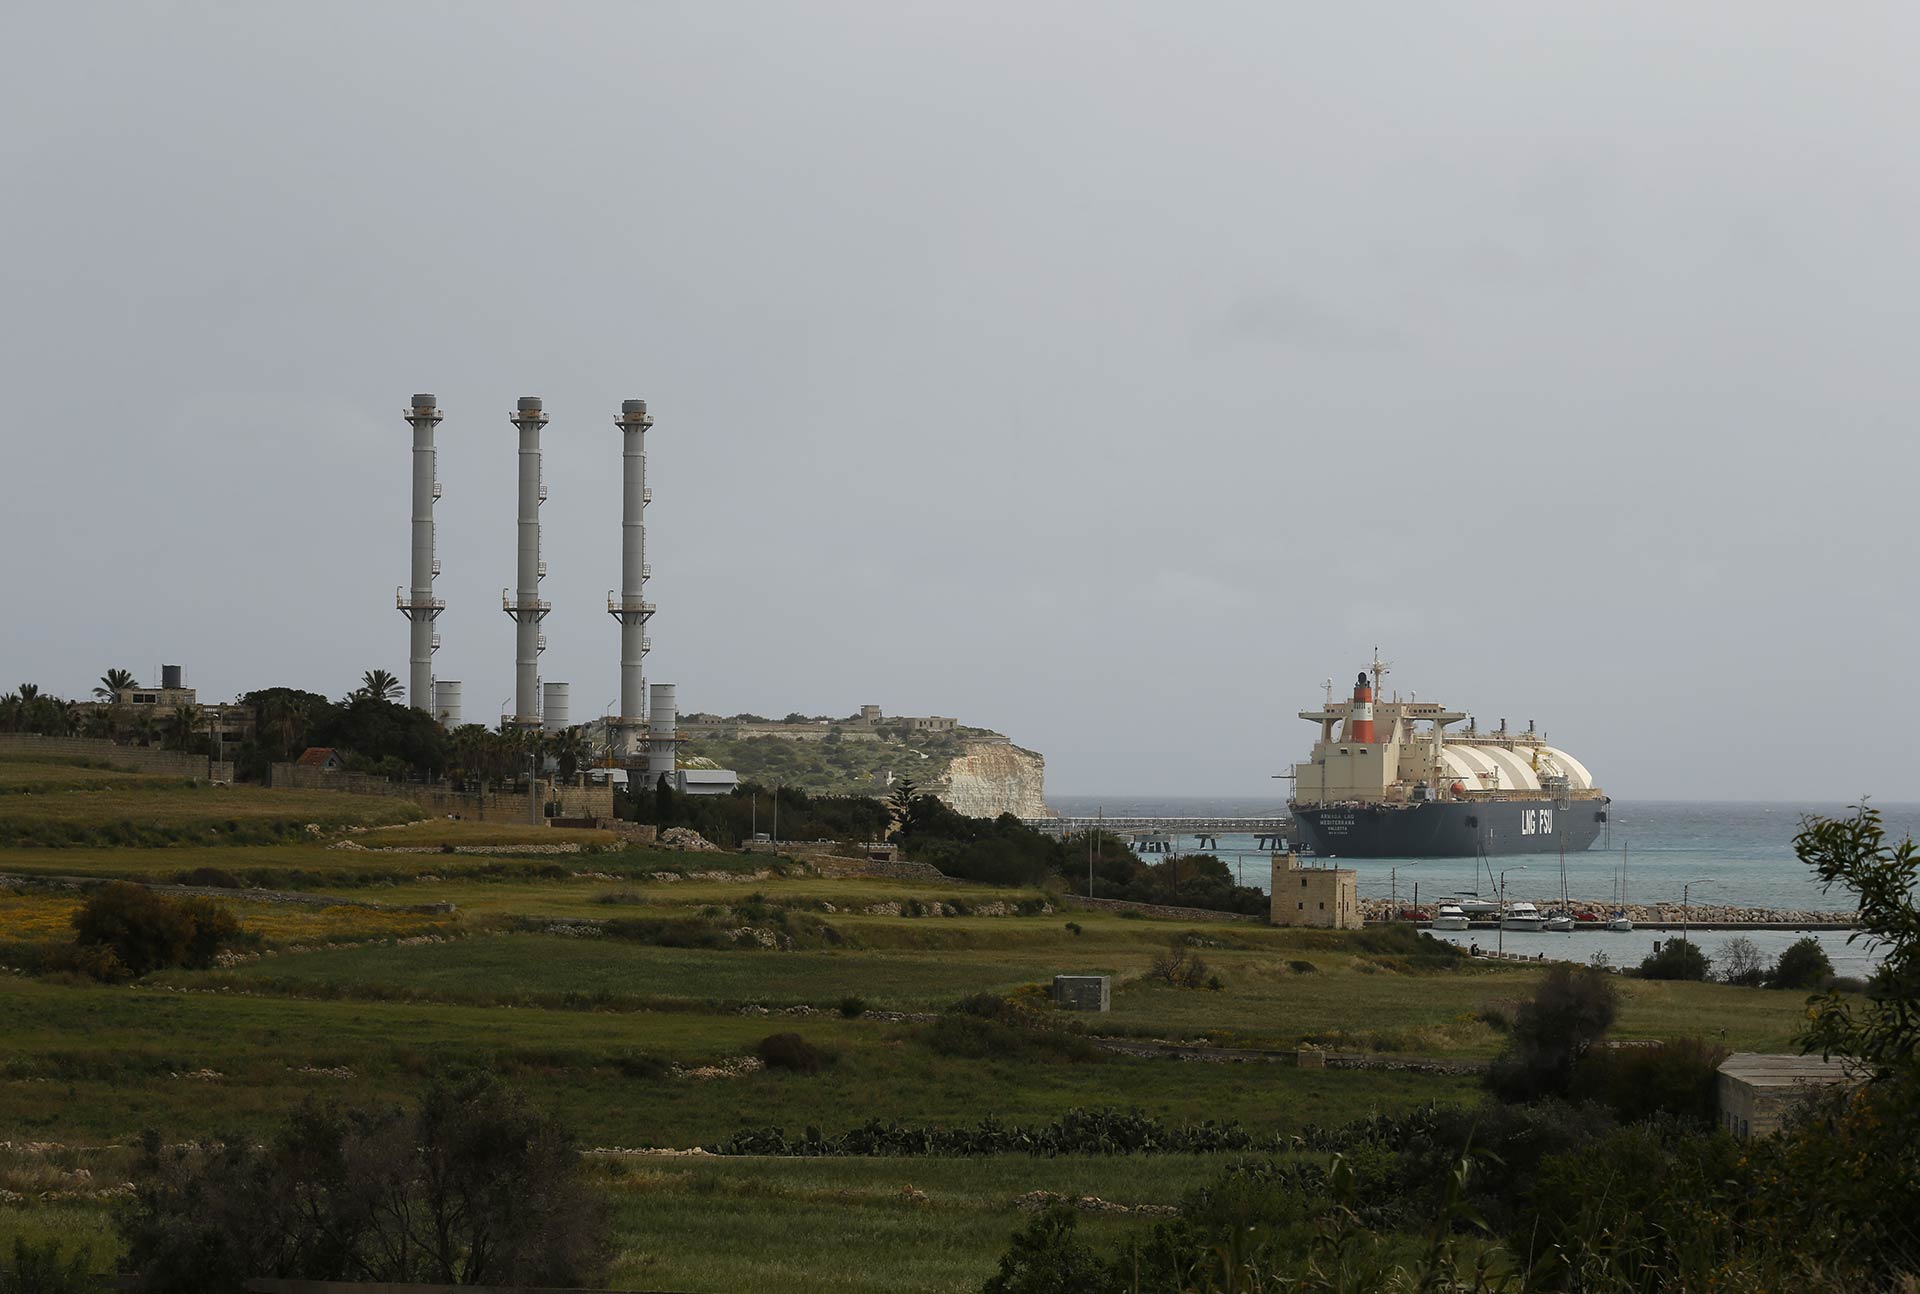 An LNG tanker moored off the village of Marsaxlokk, location of the recently constructed Delimara Power Station, which runs on natural gas. Credit: Reuters